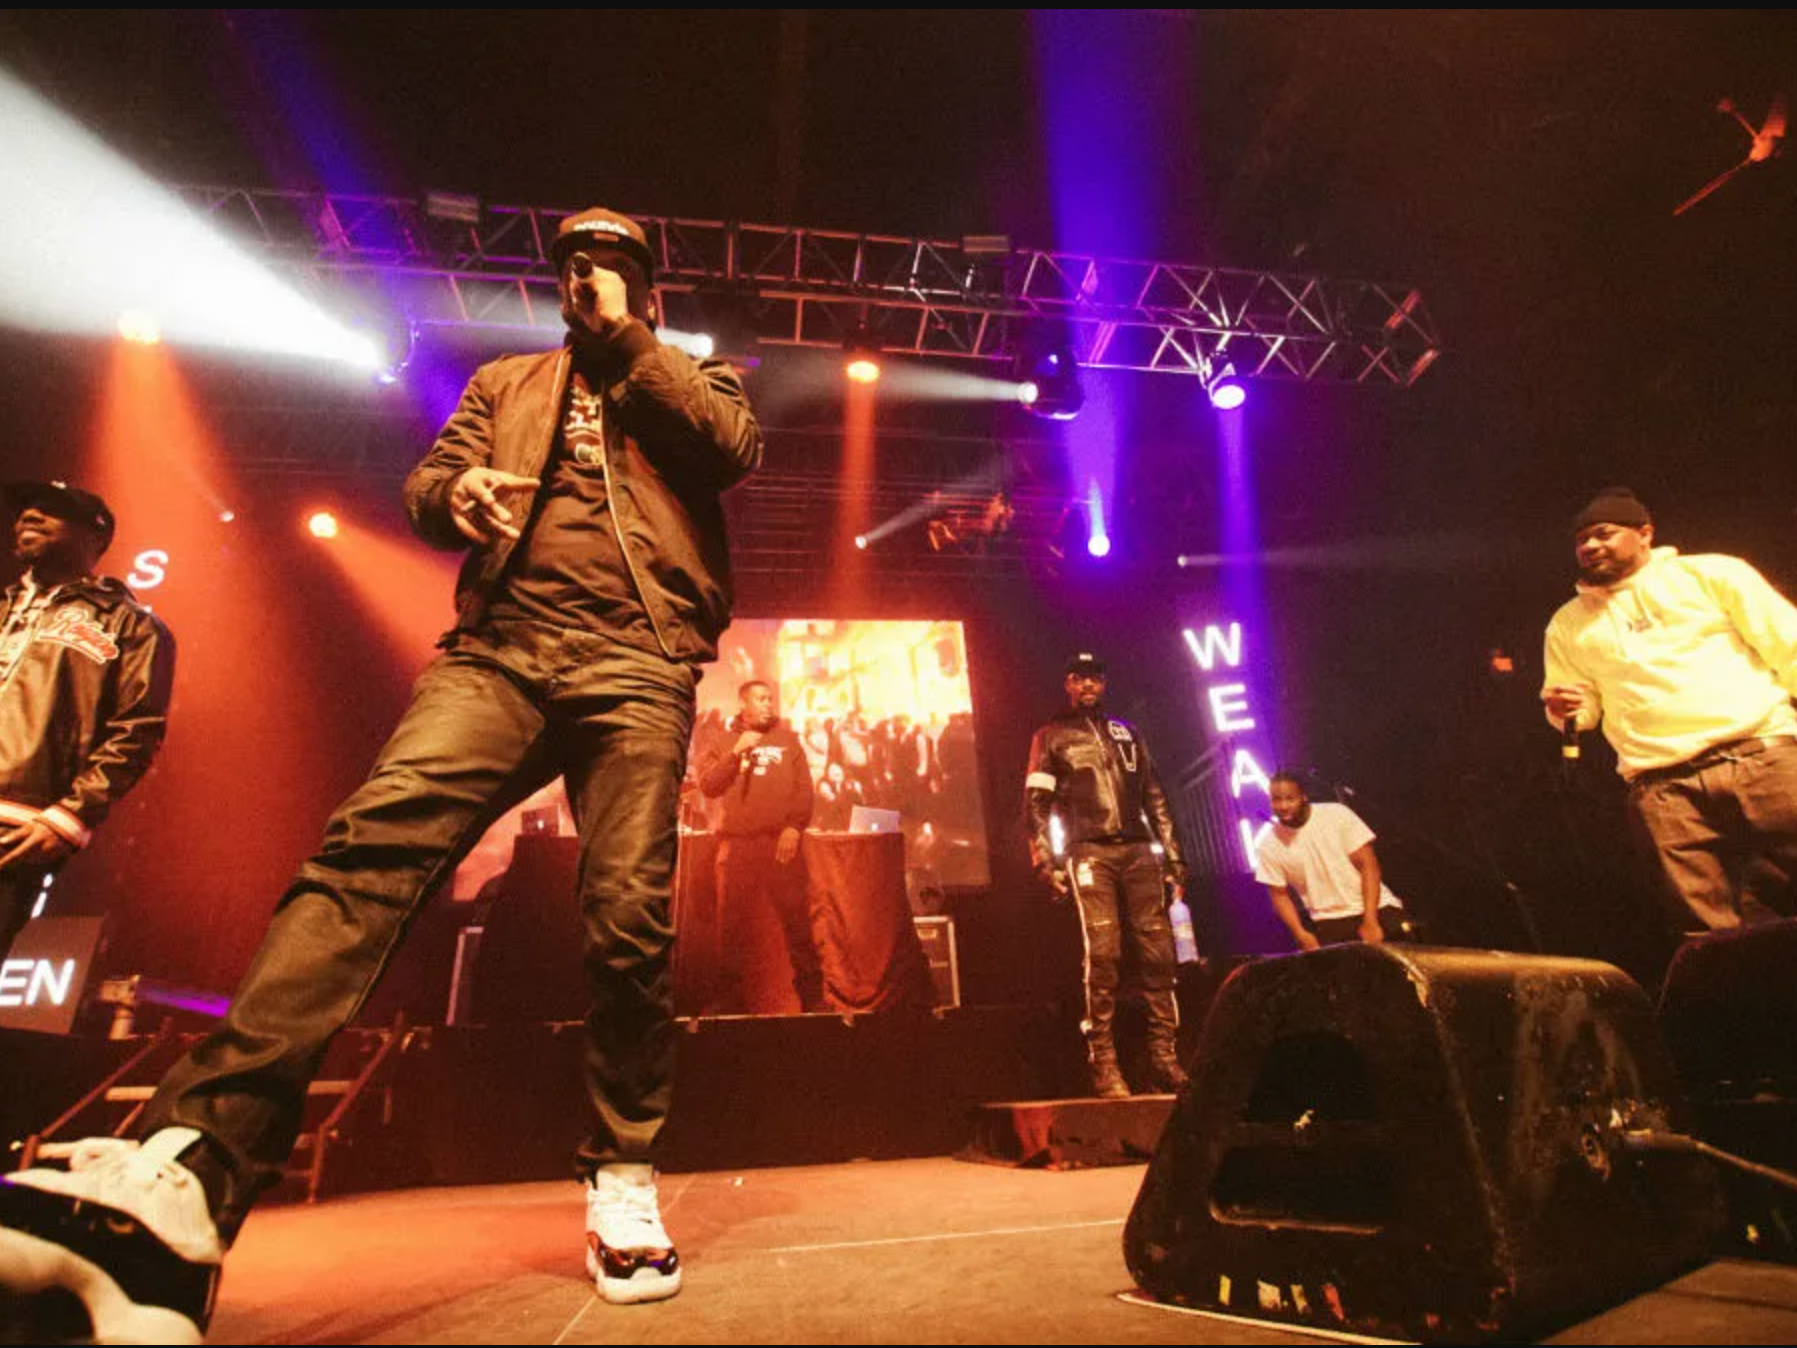 Wu-Tang Clan & Run The Jewels at Fiddlers Green Amphitheatre